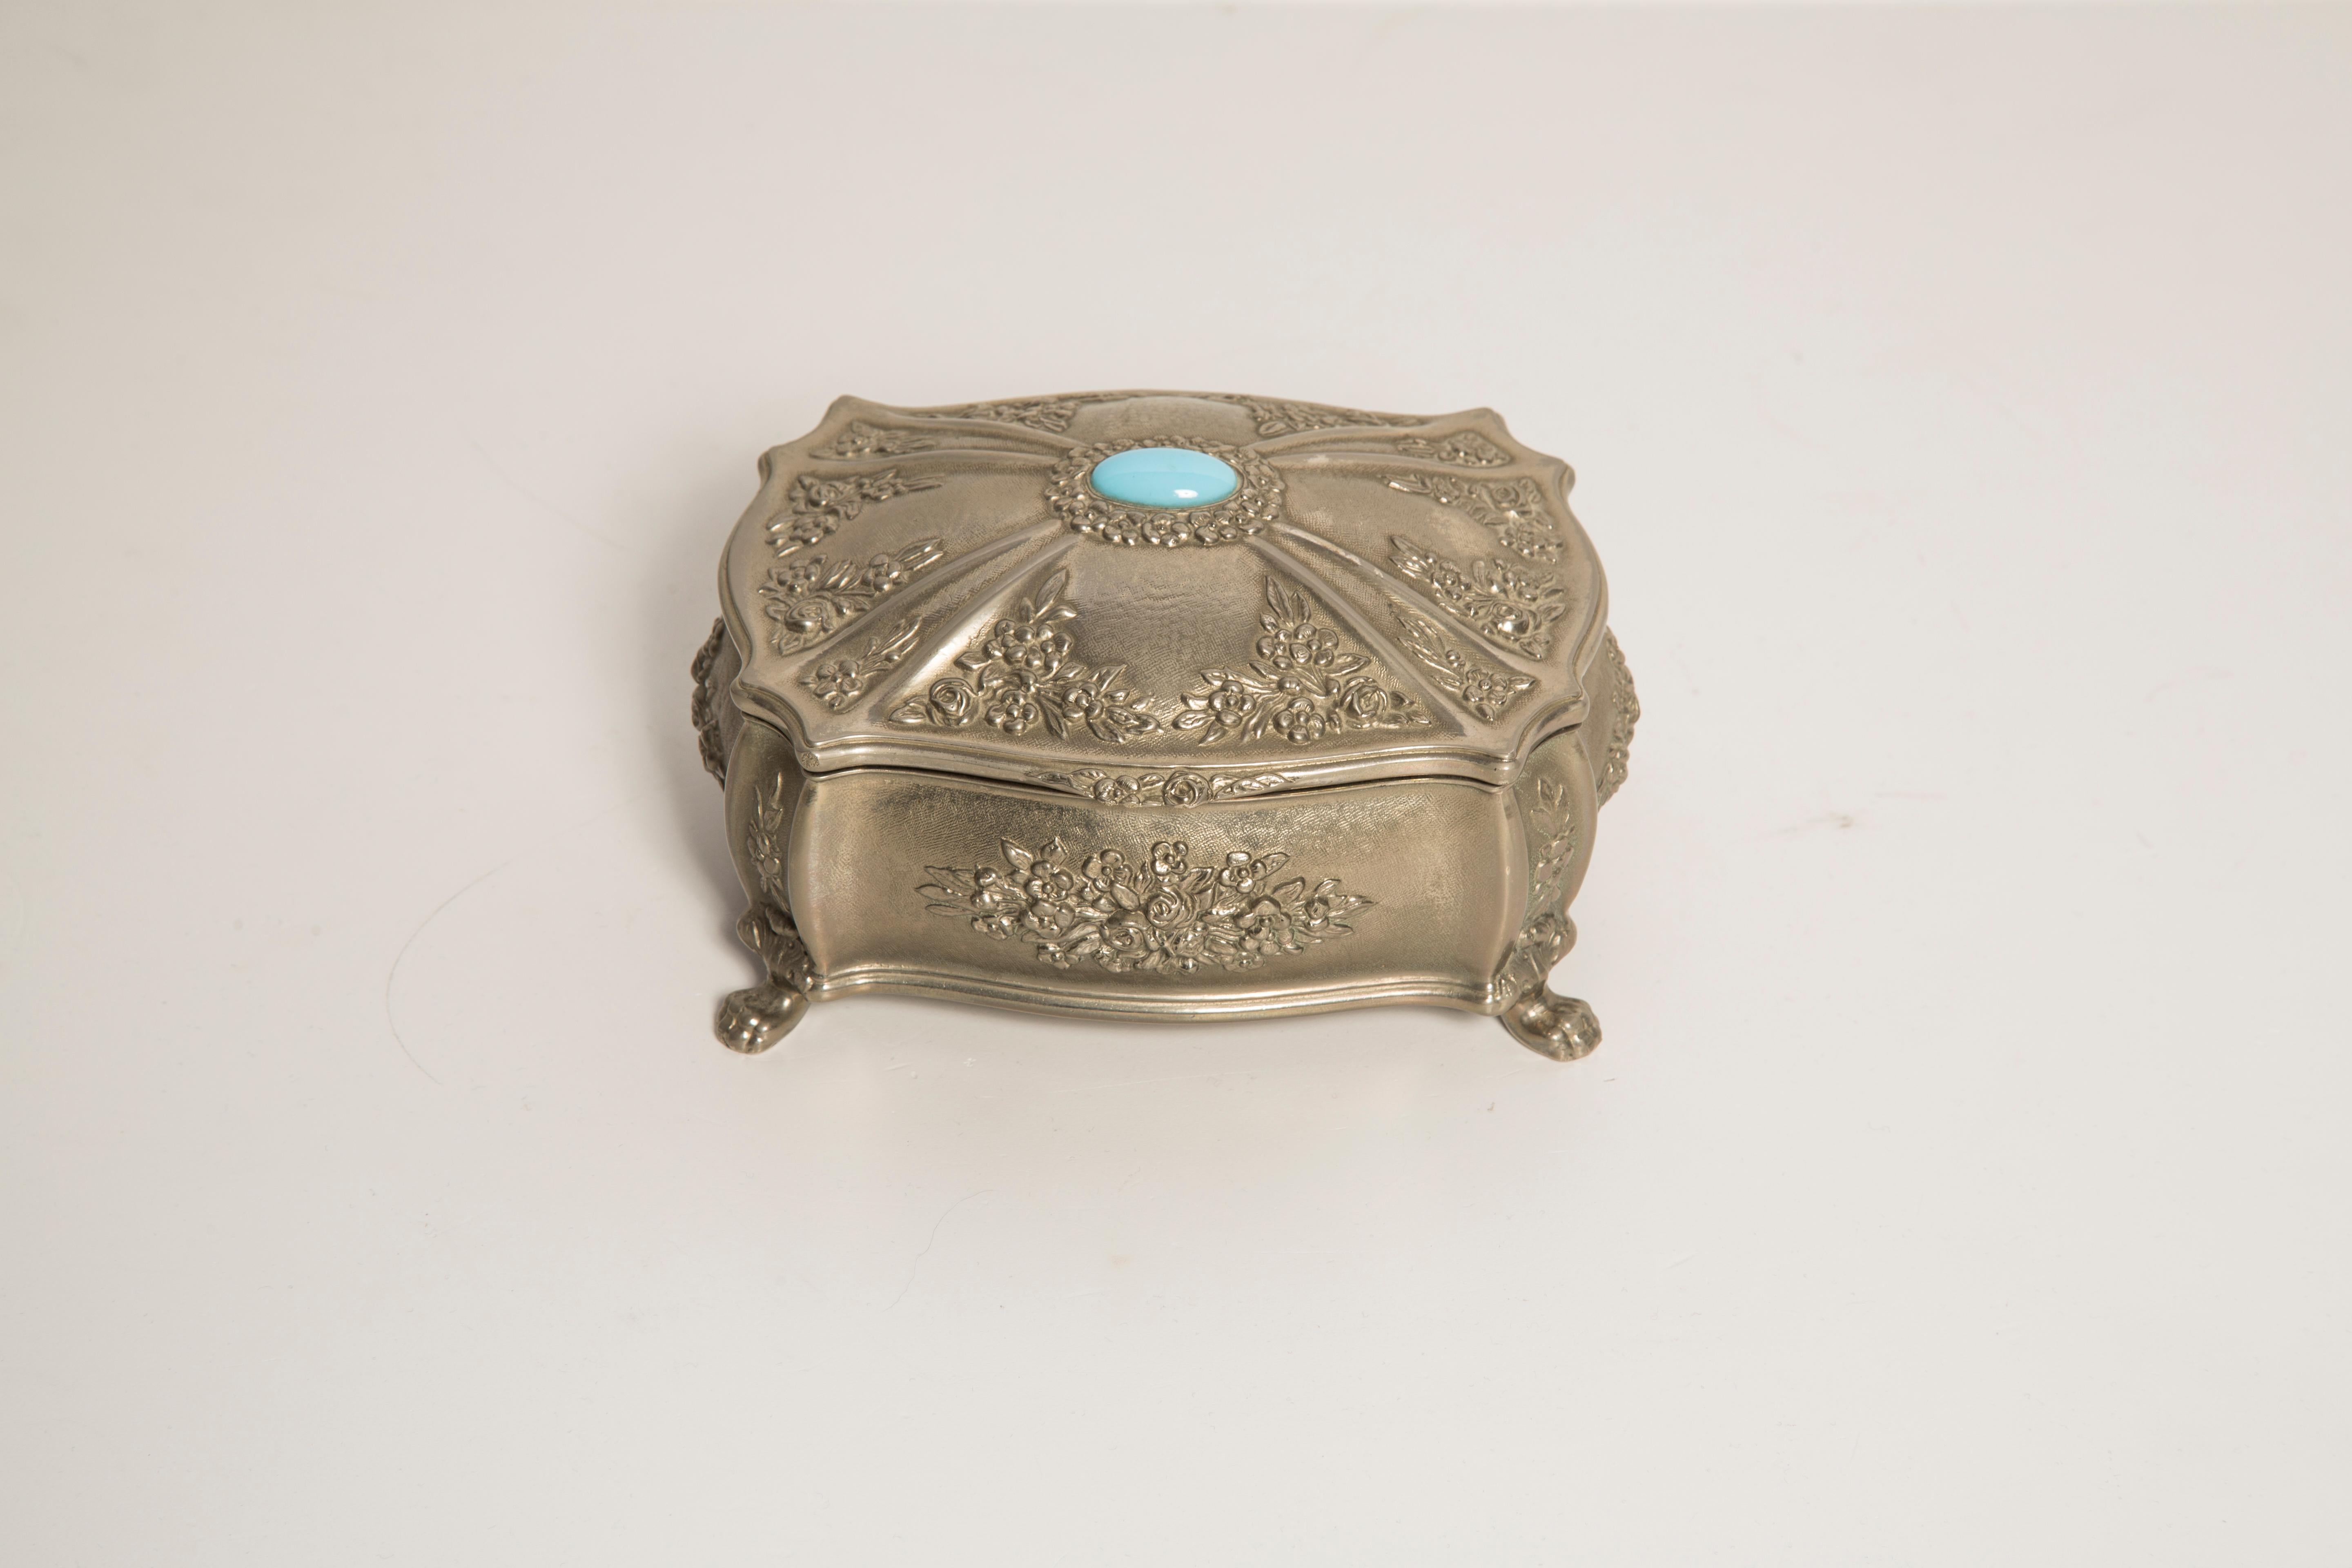 Midcentury Silver Metal Casket, Cigarette Case, or Jewelry Box, Italy, 1960s 2